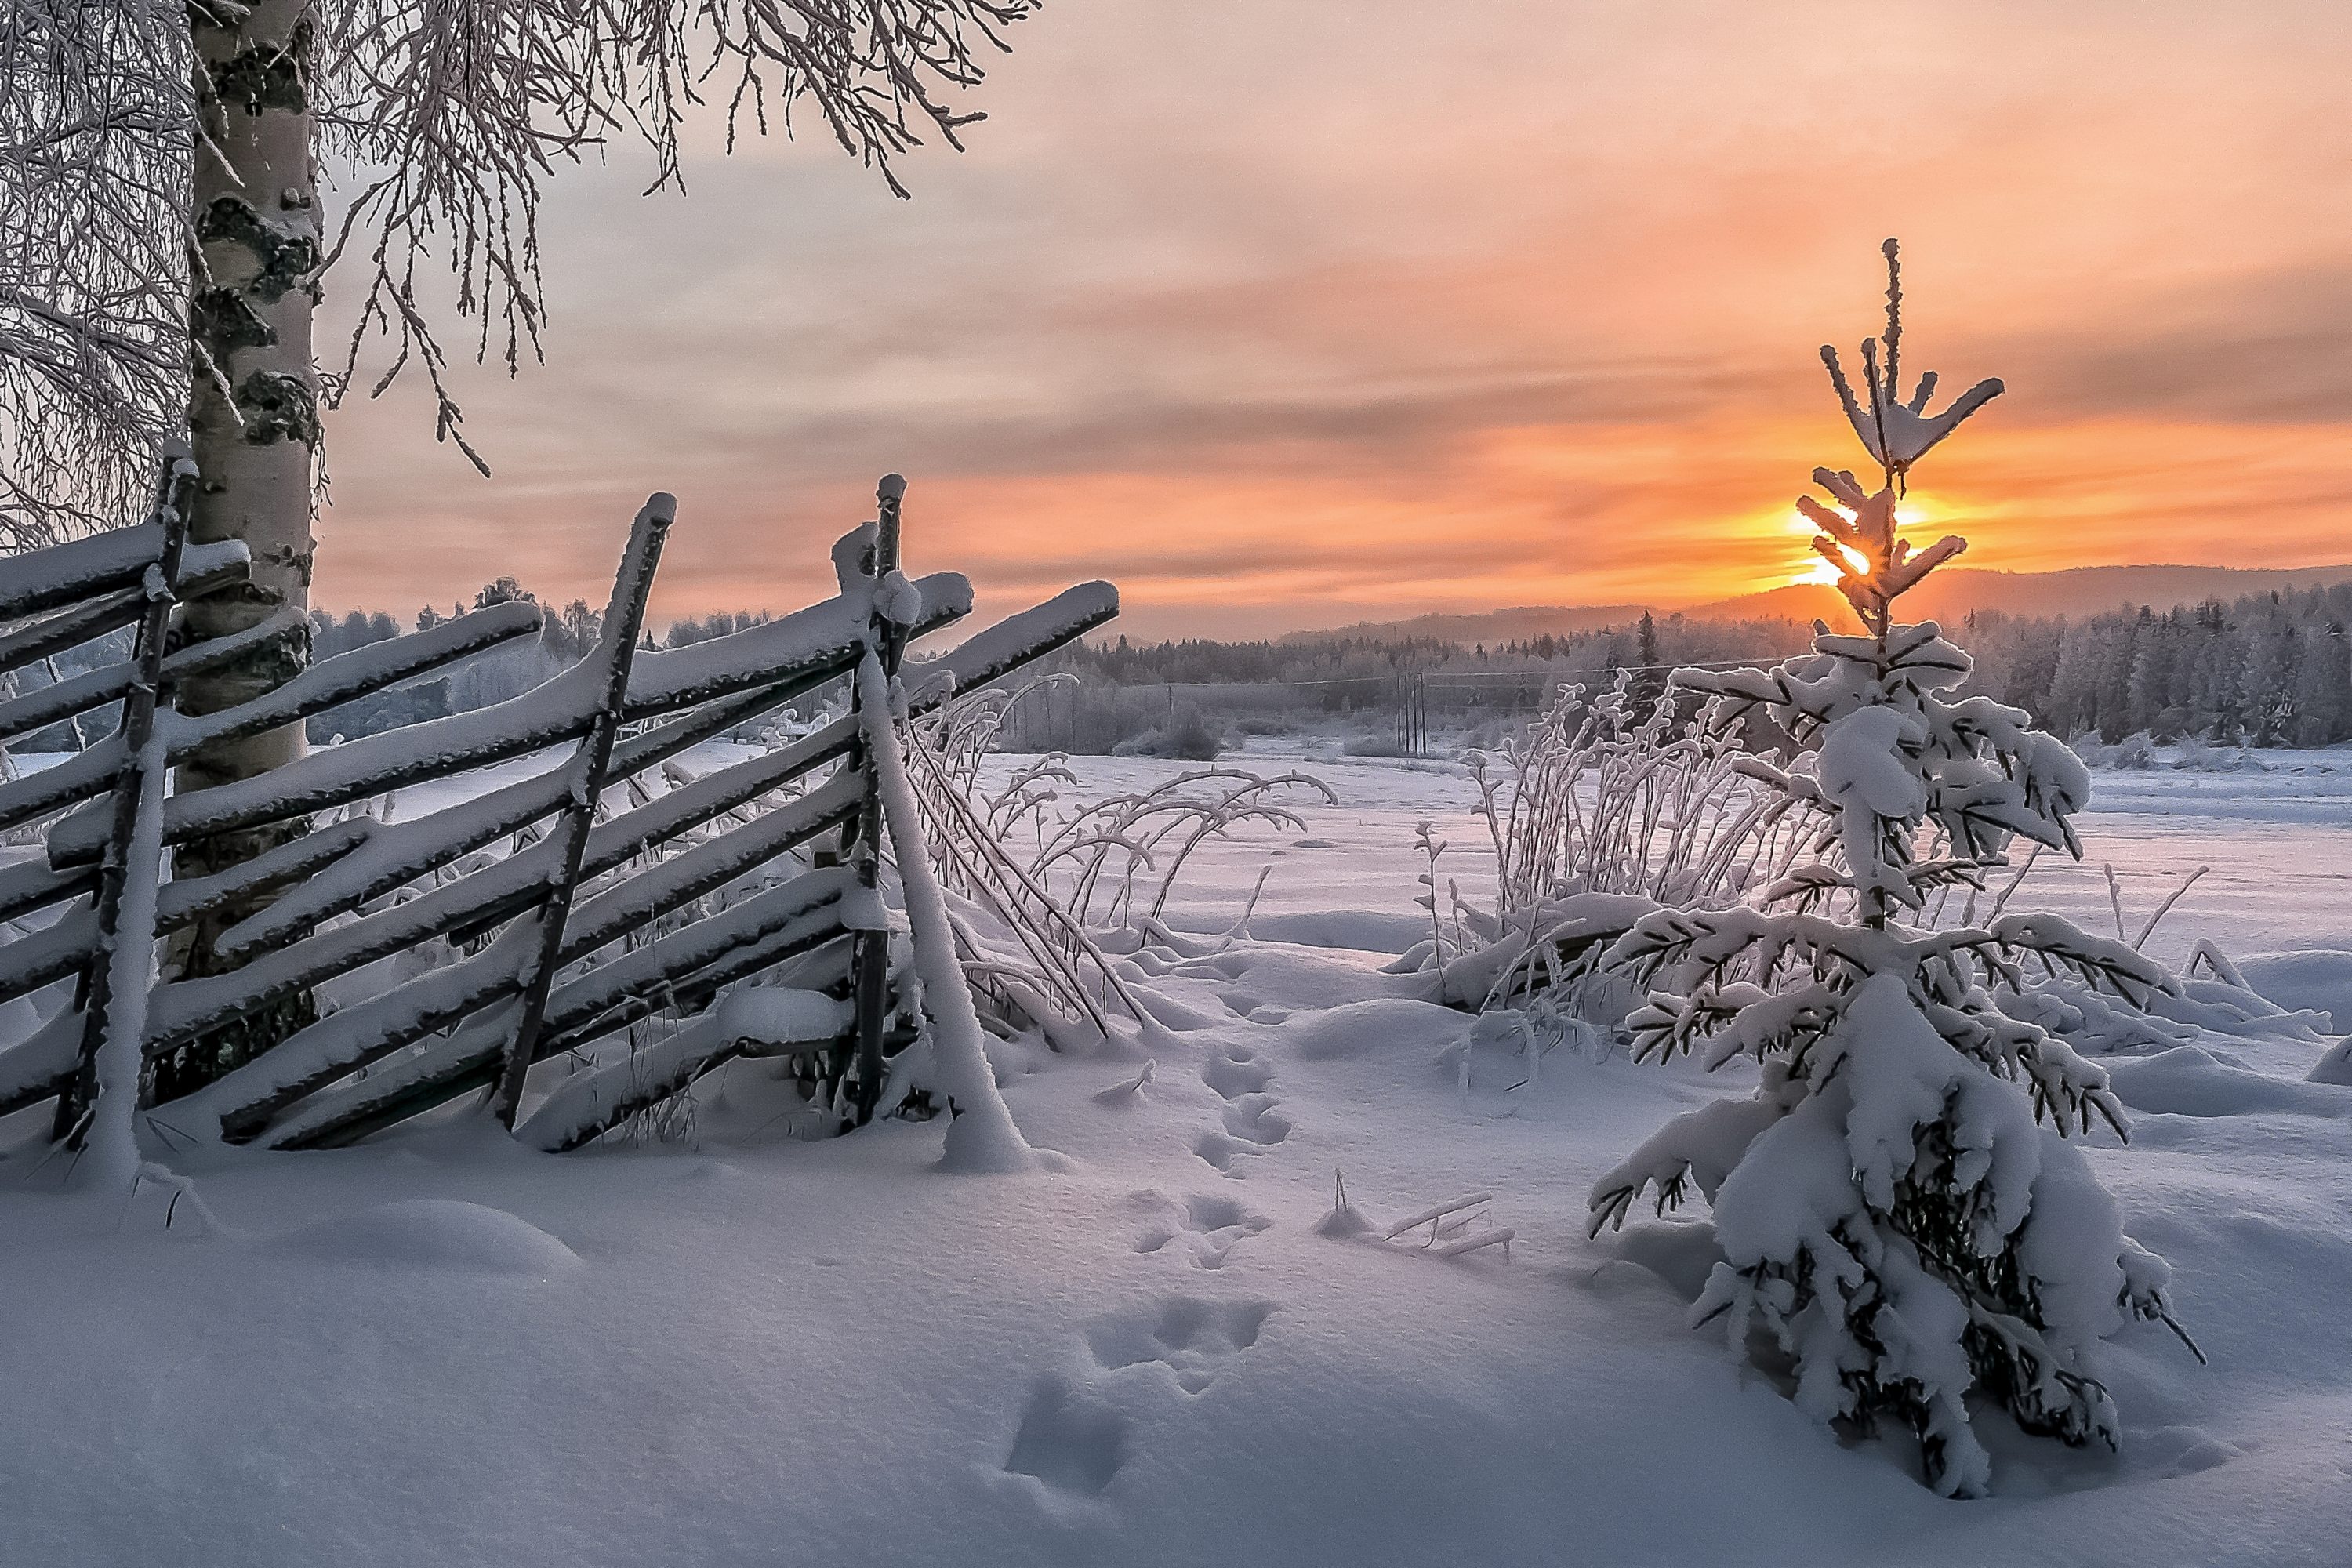 A sunset over the snowy field